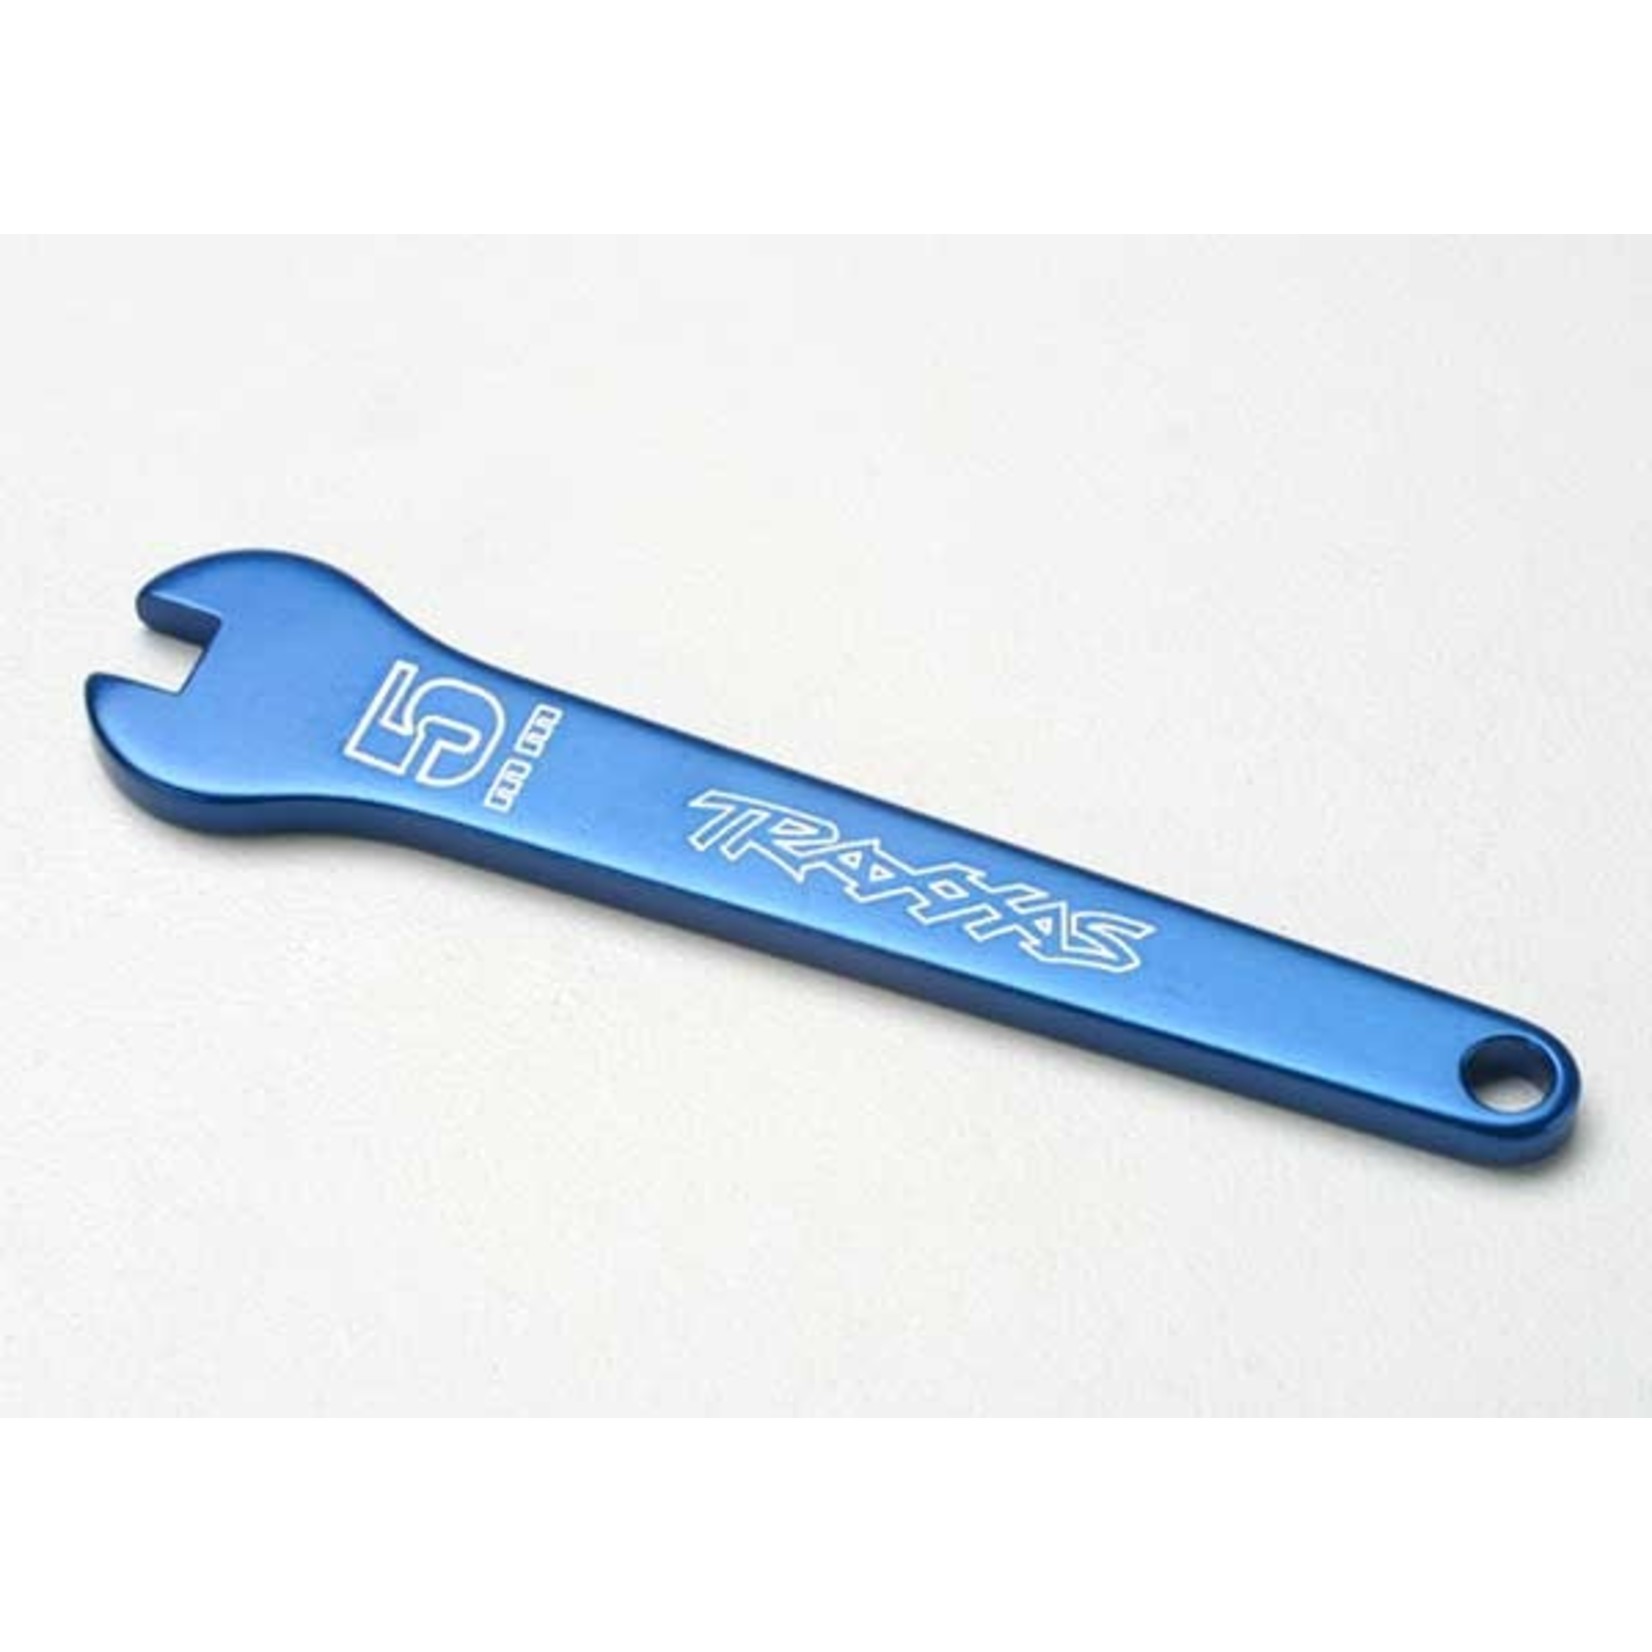 Traxxas 5477 - Flat wrench, 5mm (blue anodized aluminum)